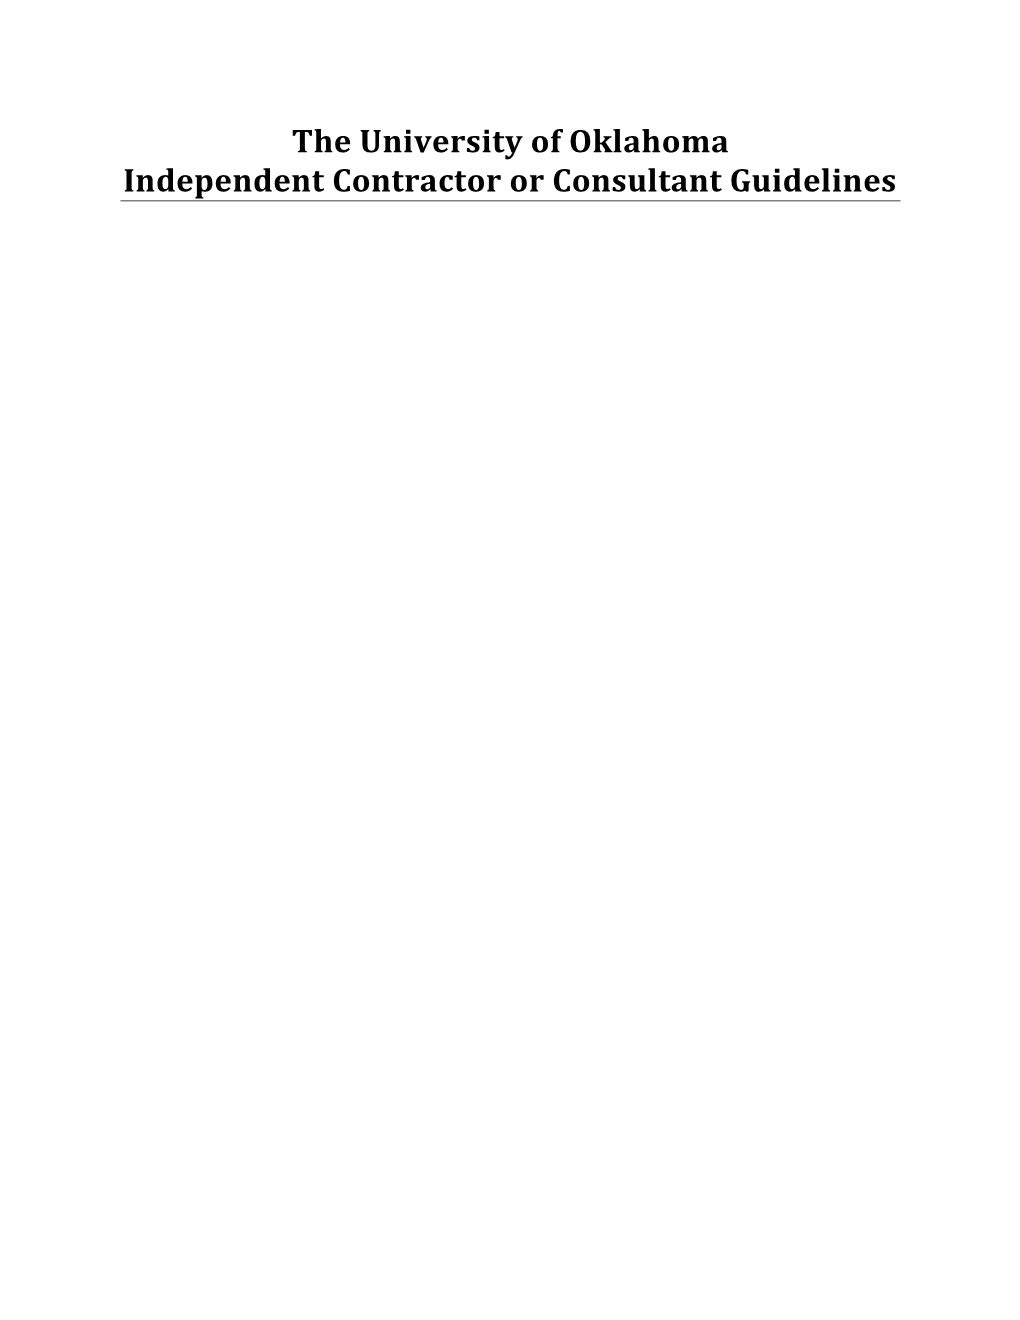 Independent Contractor Or Consultant Guidelines